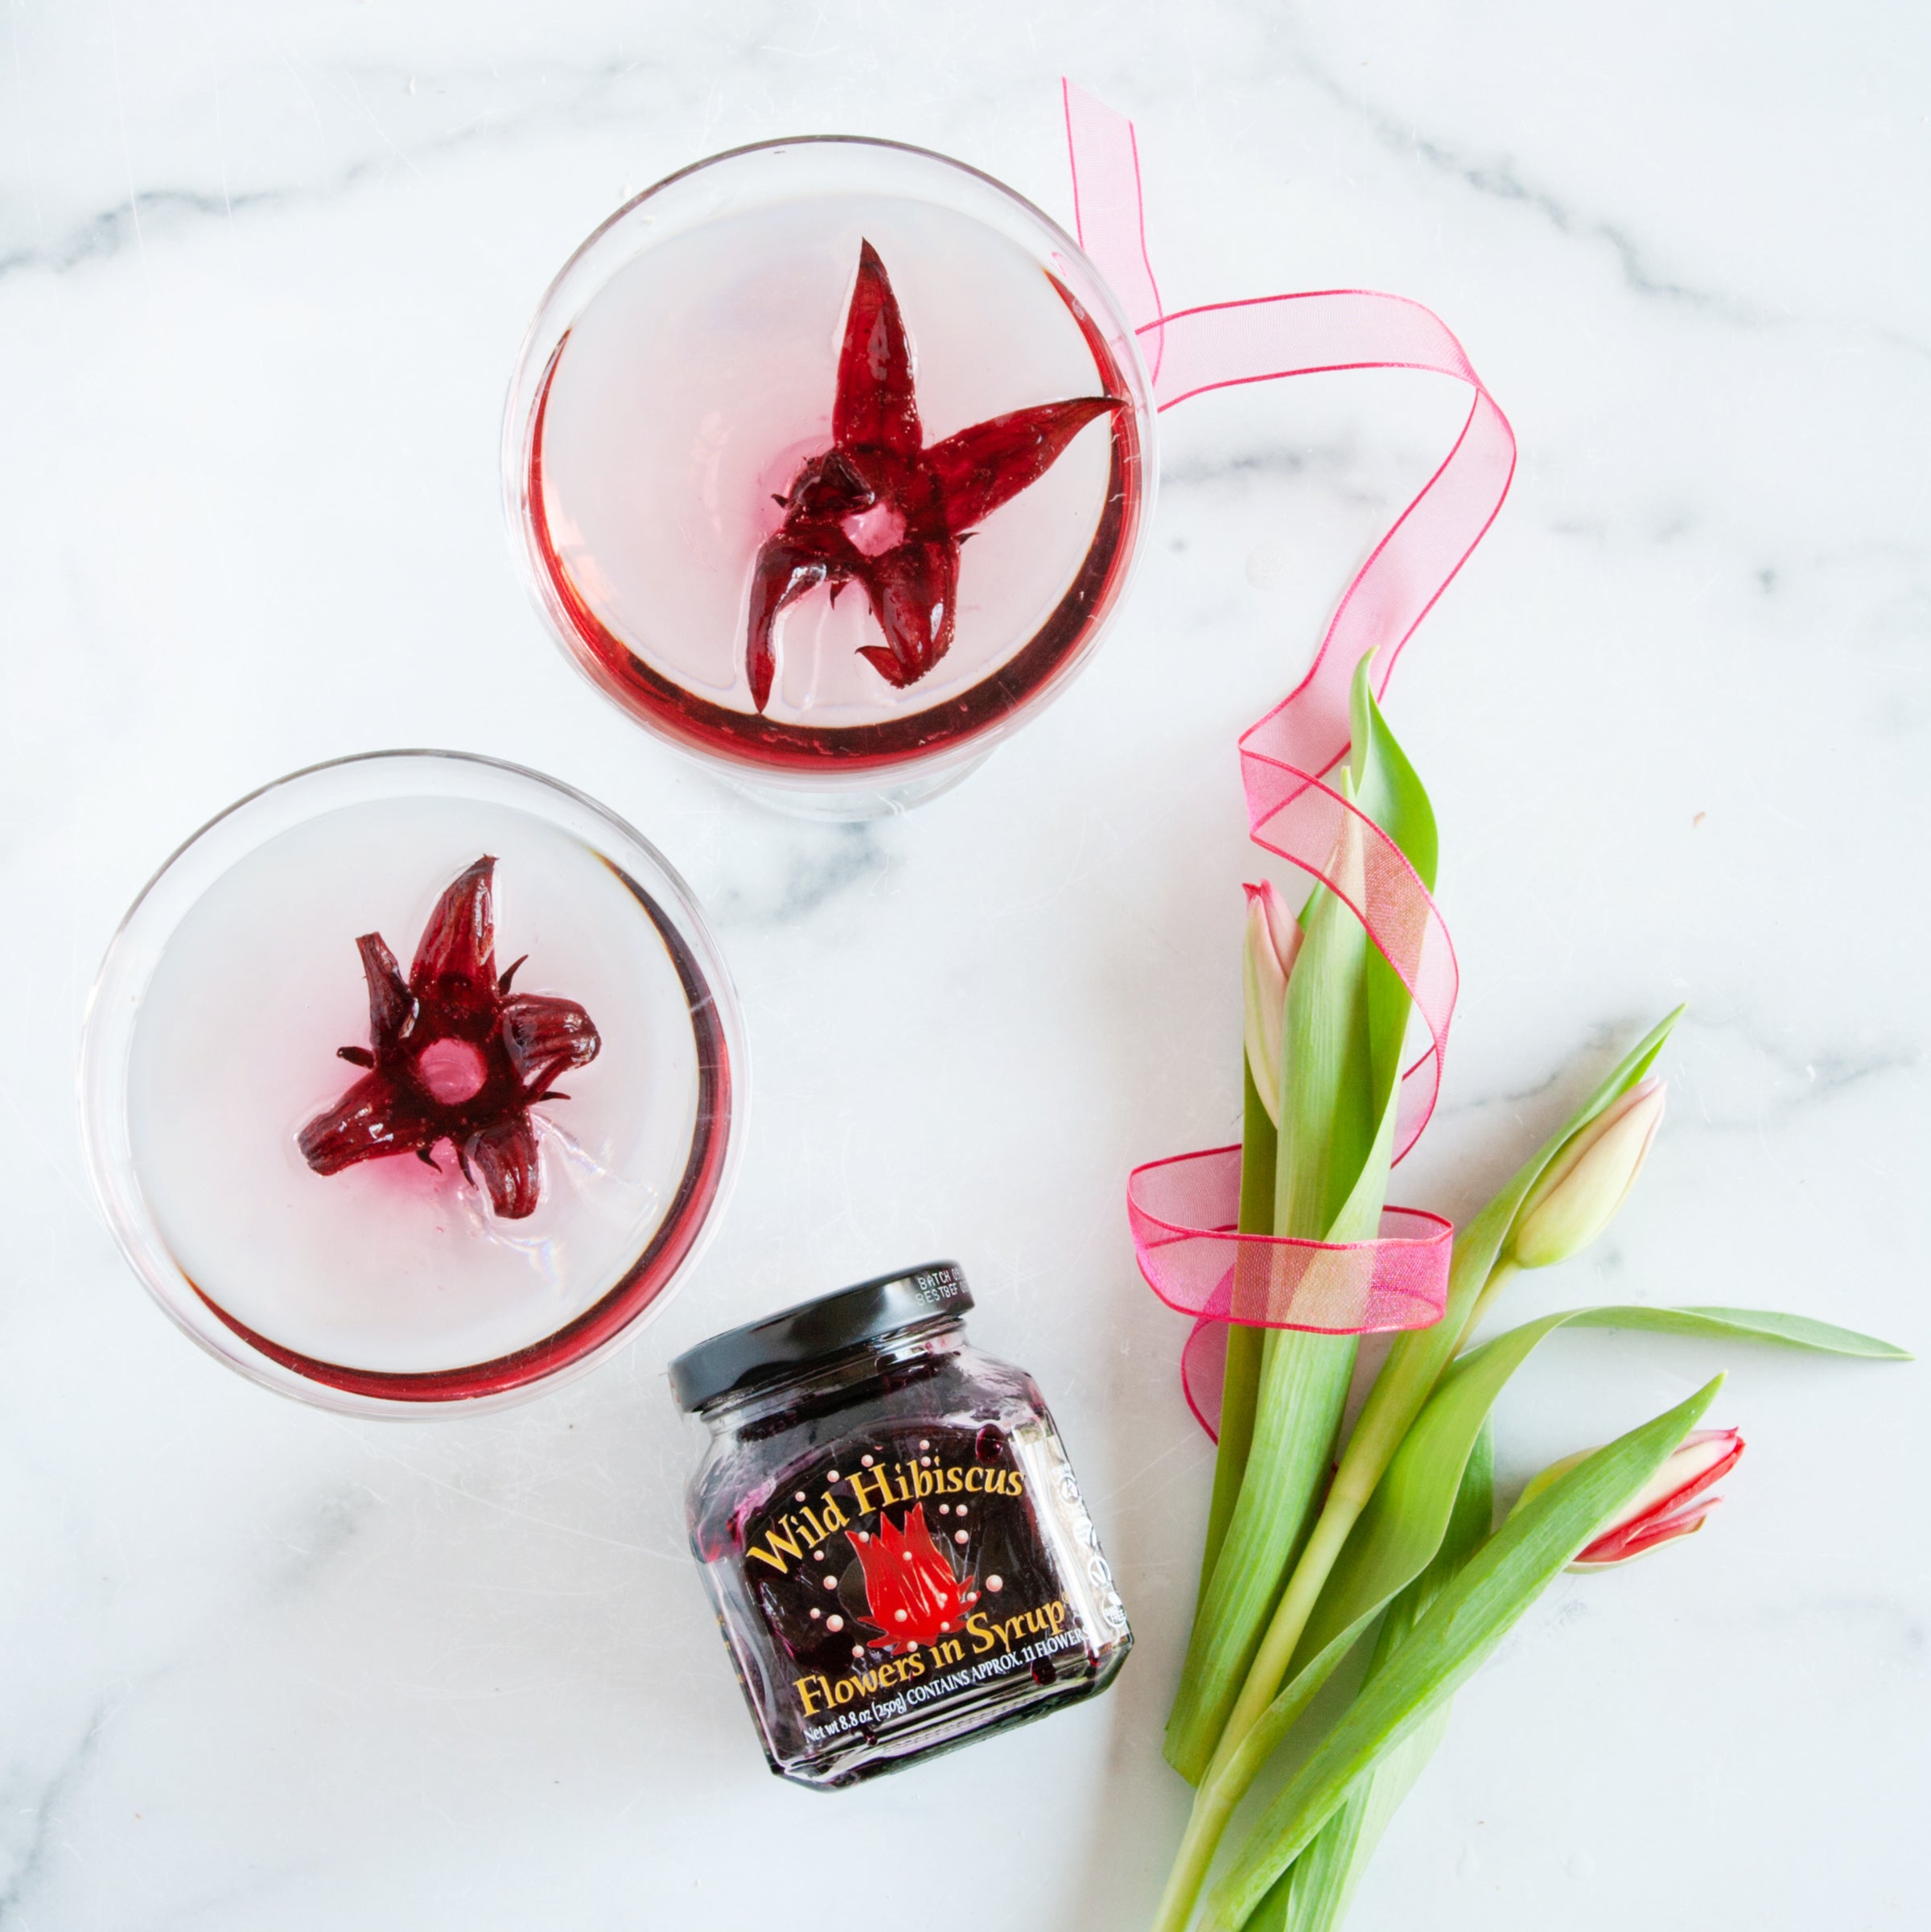 Buy wholesale Hibiscus syrup